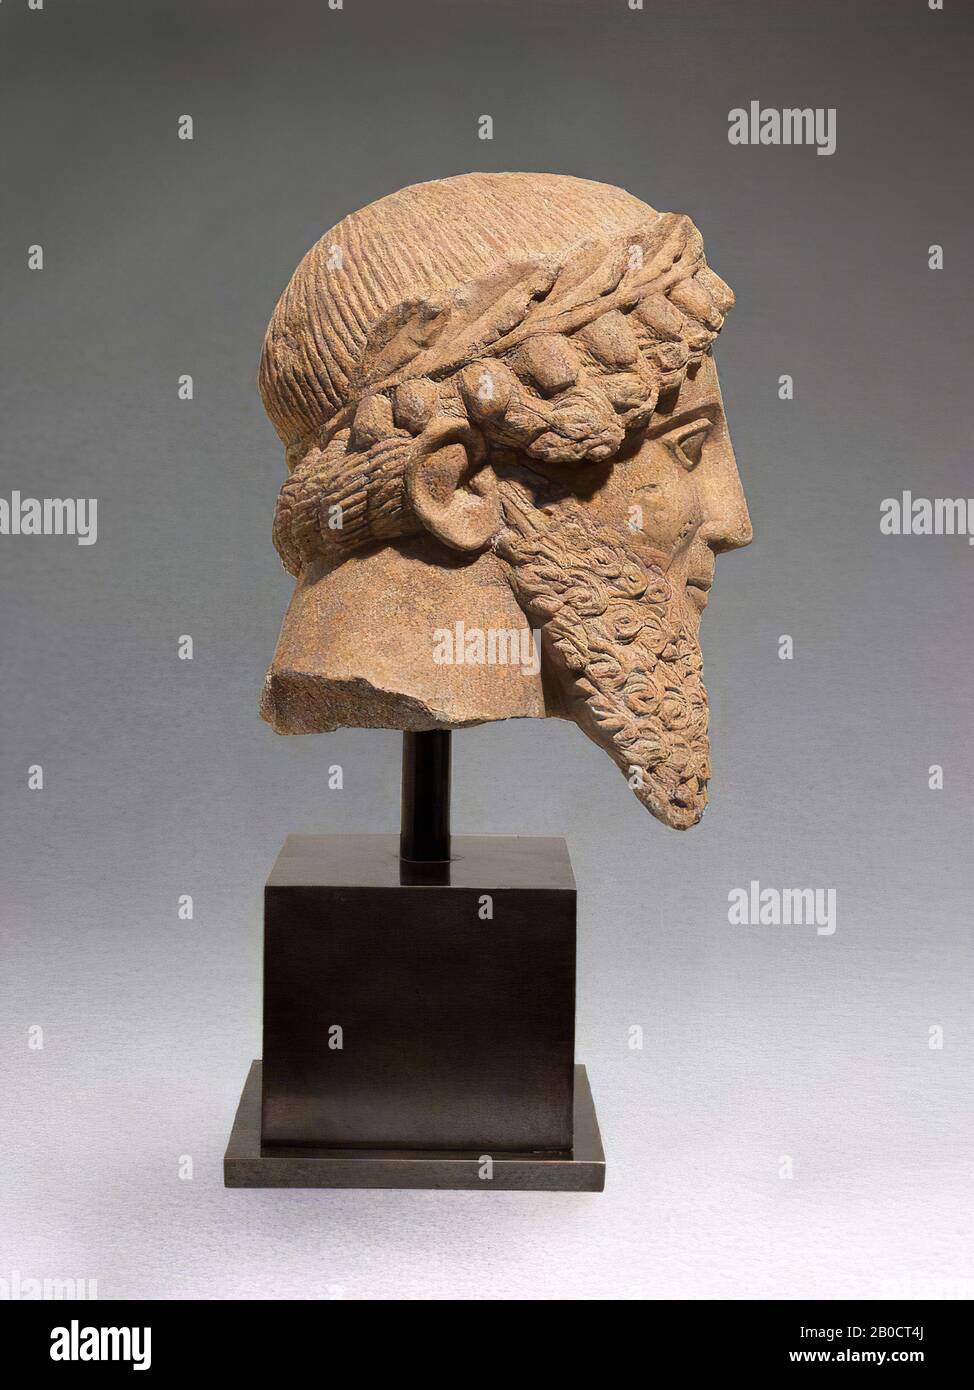 The portrait head is made of Cypriot limestone, and was originally part of a standing, male figure of life size. Such images have been found at ancient sanctuaries in Cyprus and are generally interpreted as votive gifts. The full, square beard is modeled in a symmetrical wave pattern, in contrast to the mustache, which consists of thin parallel lines. Around the mouth there is a slight smile, which is borrowed from the Greek art of the archaic period (6th century BC). The nose is straight, the eyebrows bent and provided with a sharp profile. The eyes are almond-shaped. Over the hair is a large Stock Photo